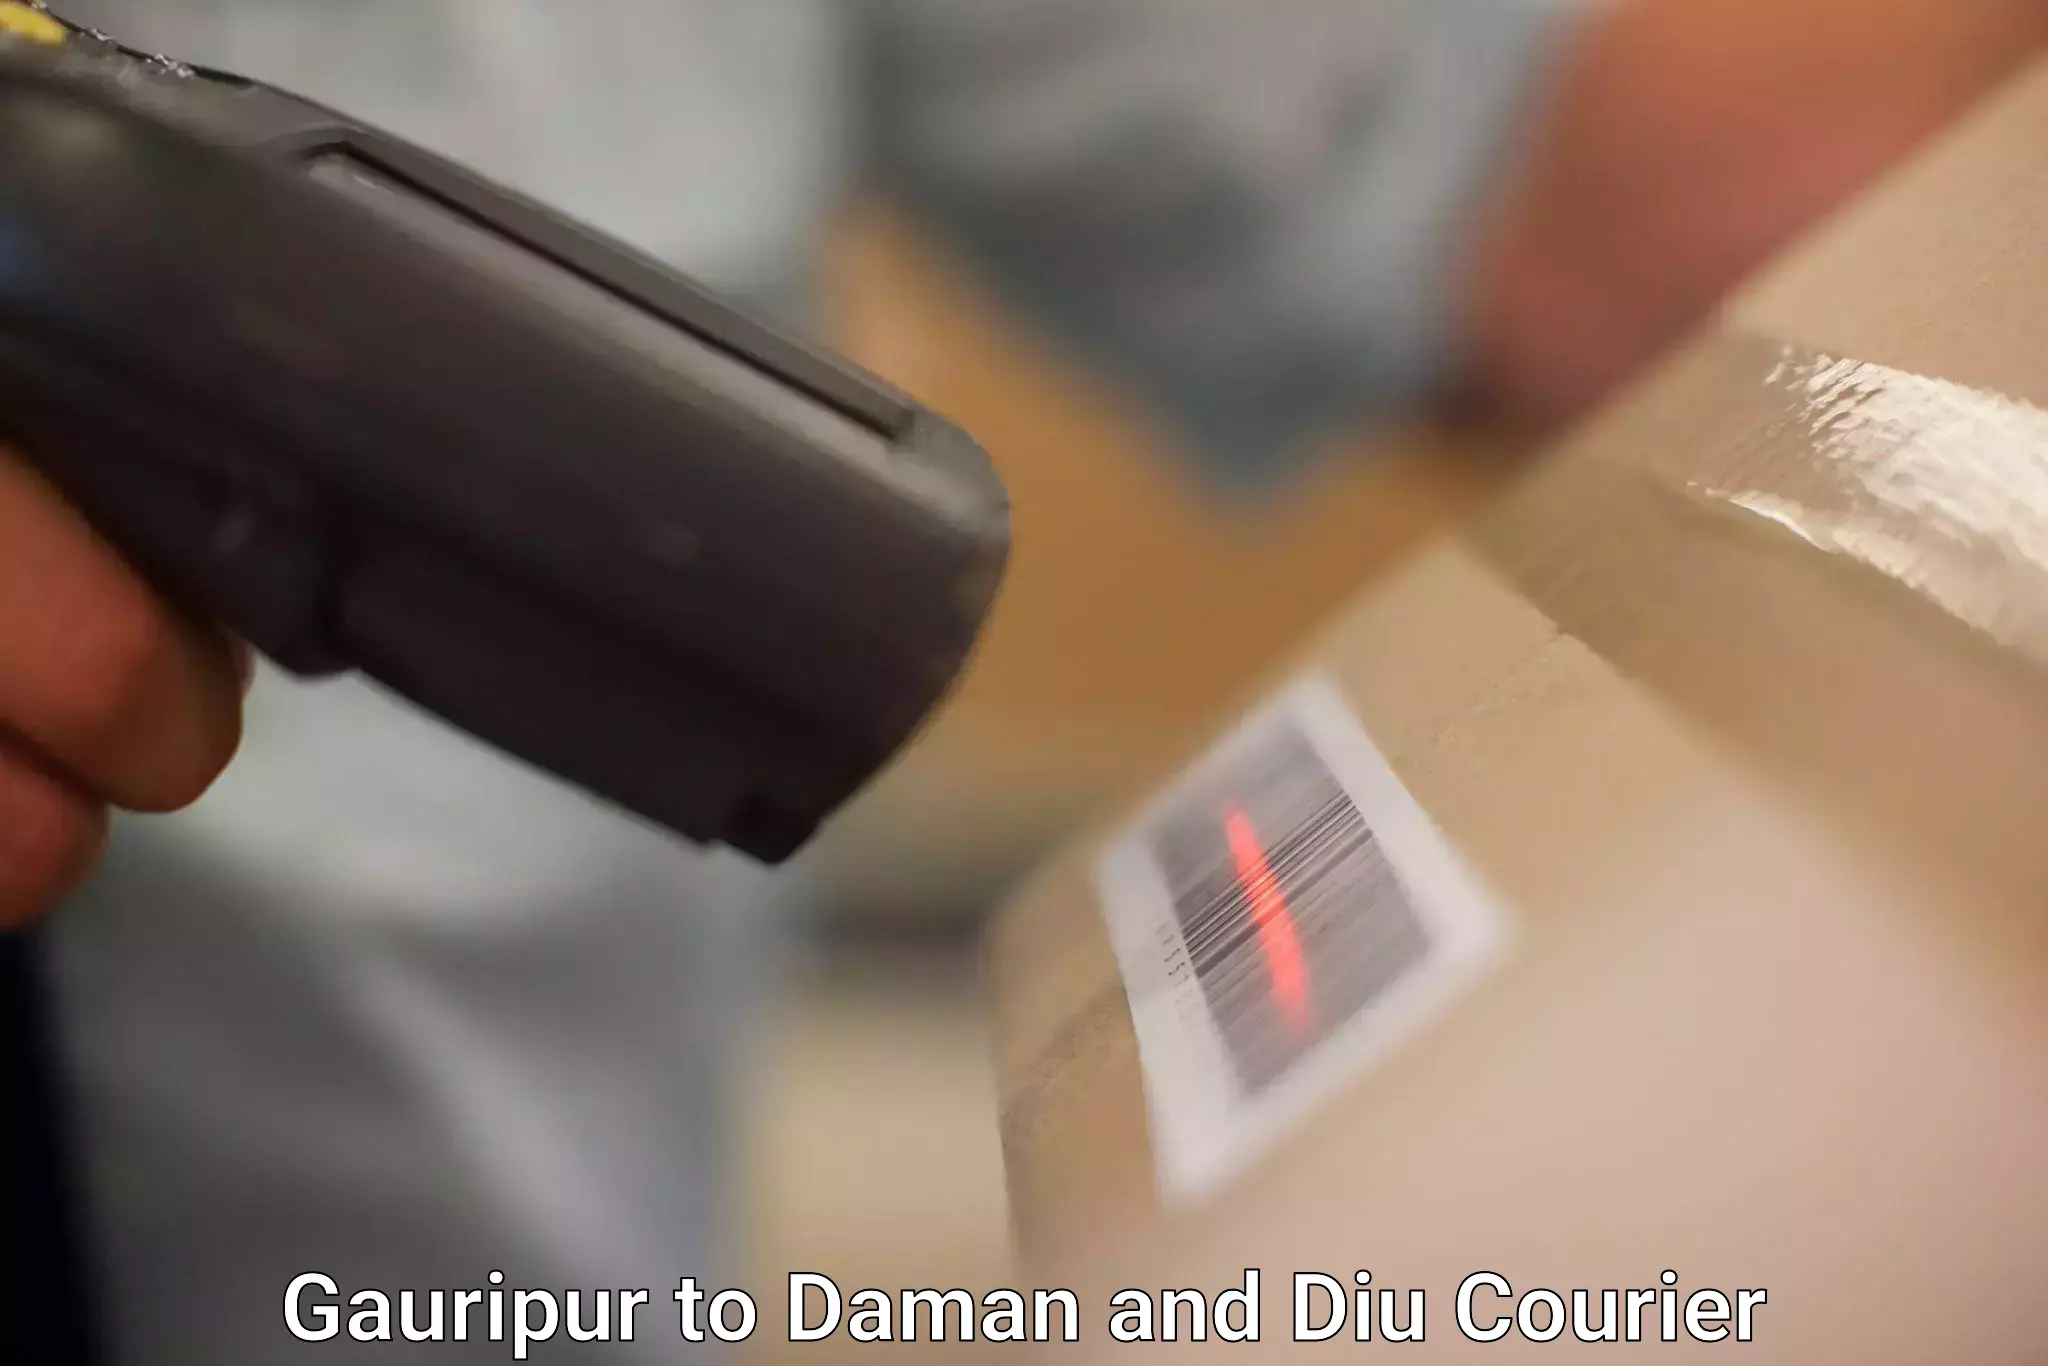 Multi-city courier Gauripur to Diu